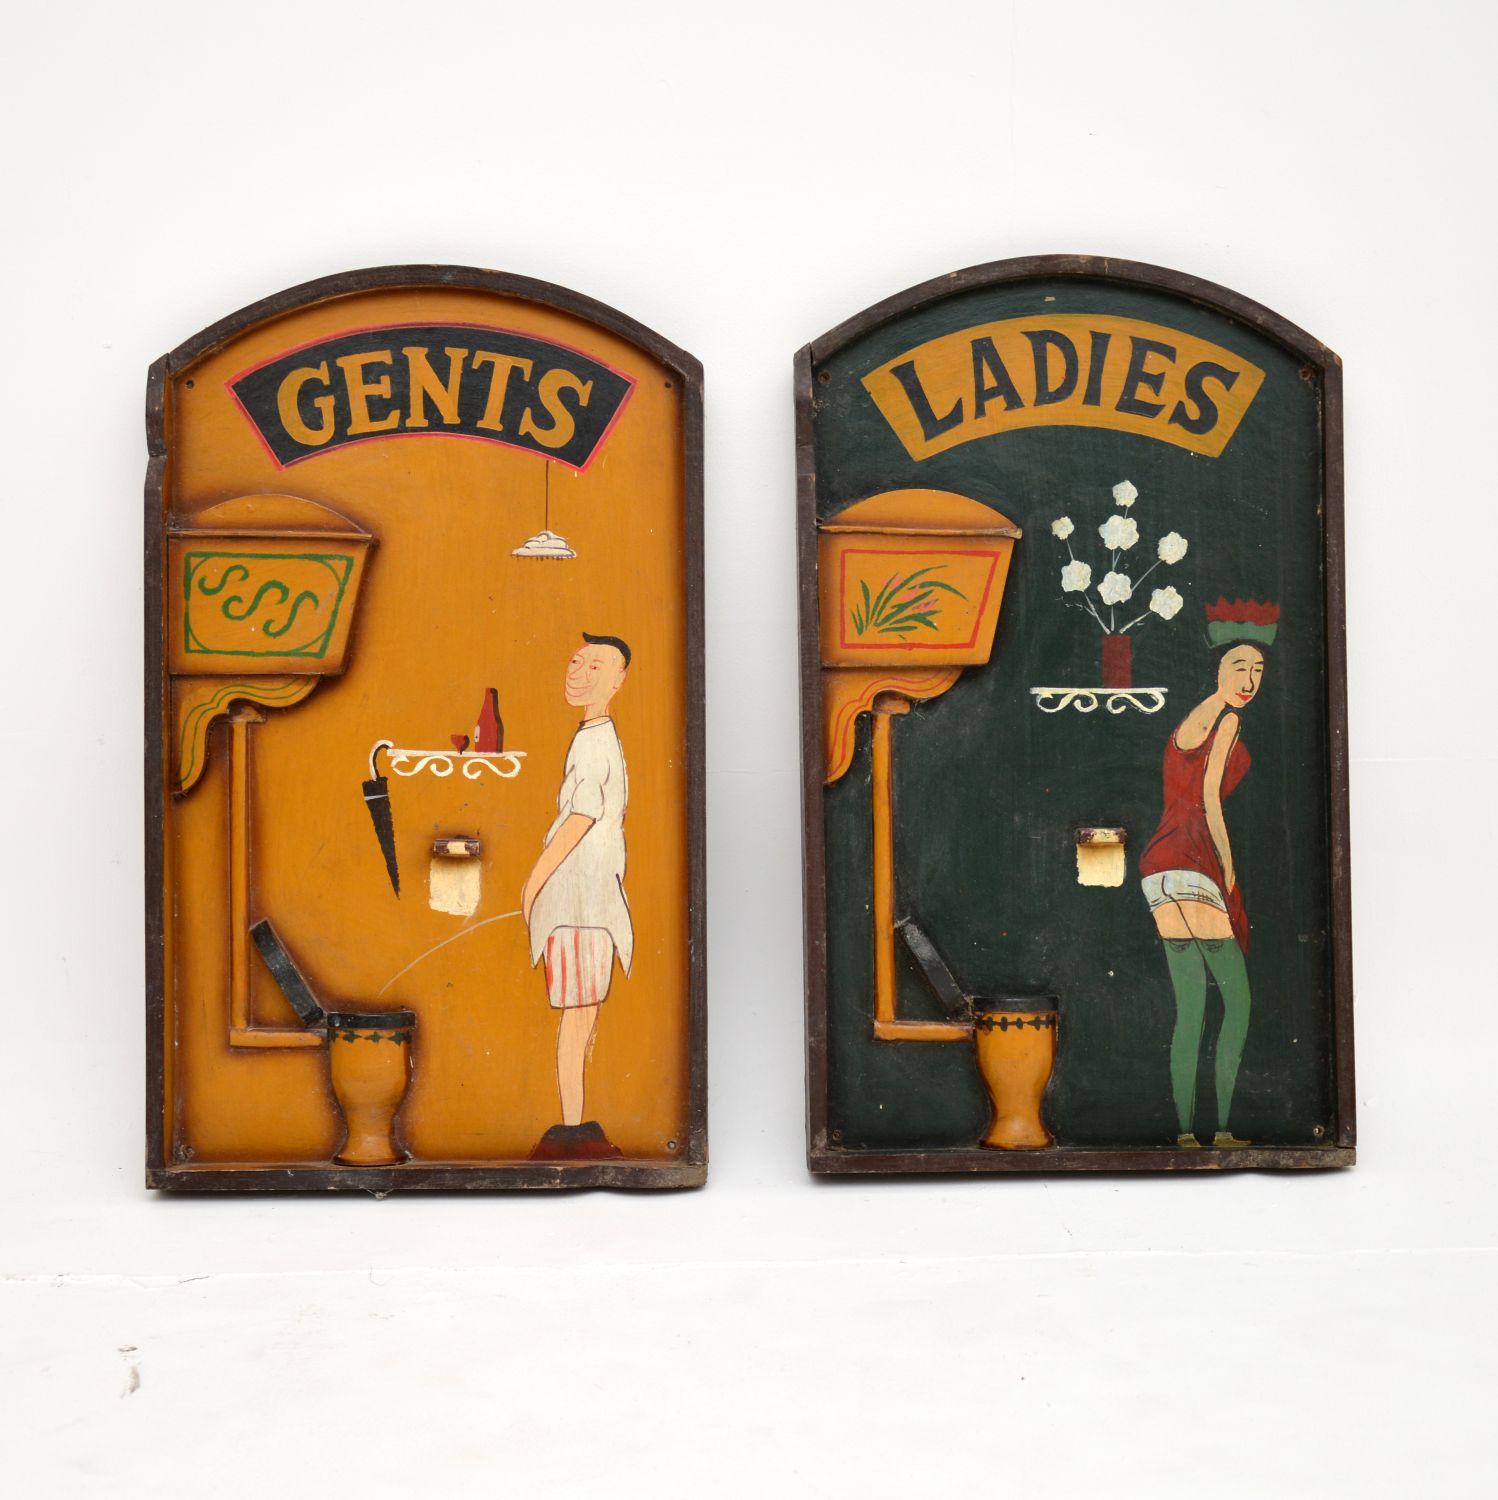 A humorous and very unusual pair of his and hers Art Deco toilet signs. These were made in England and date from around the 1930’s.

They are carved and painted, with the toilets and loo roll holders protruding as reliefs. They are full of